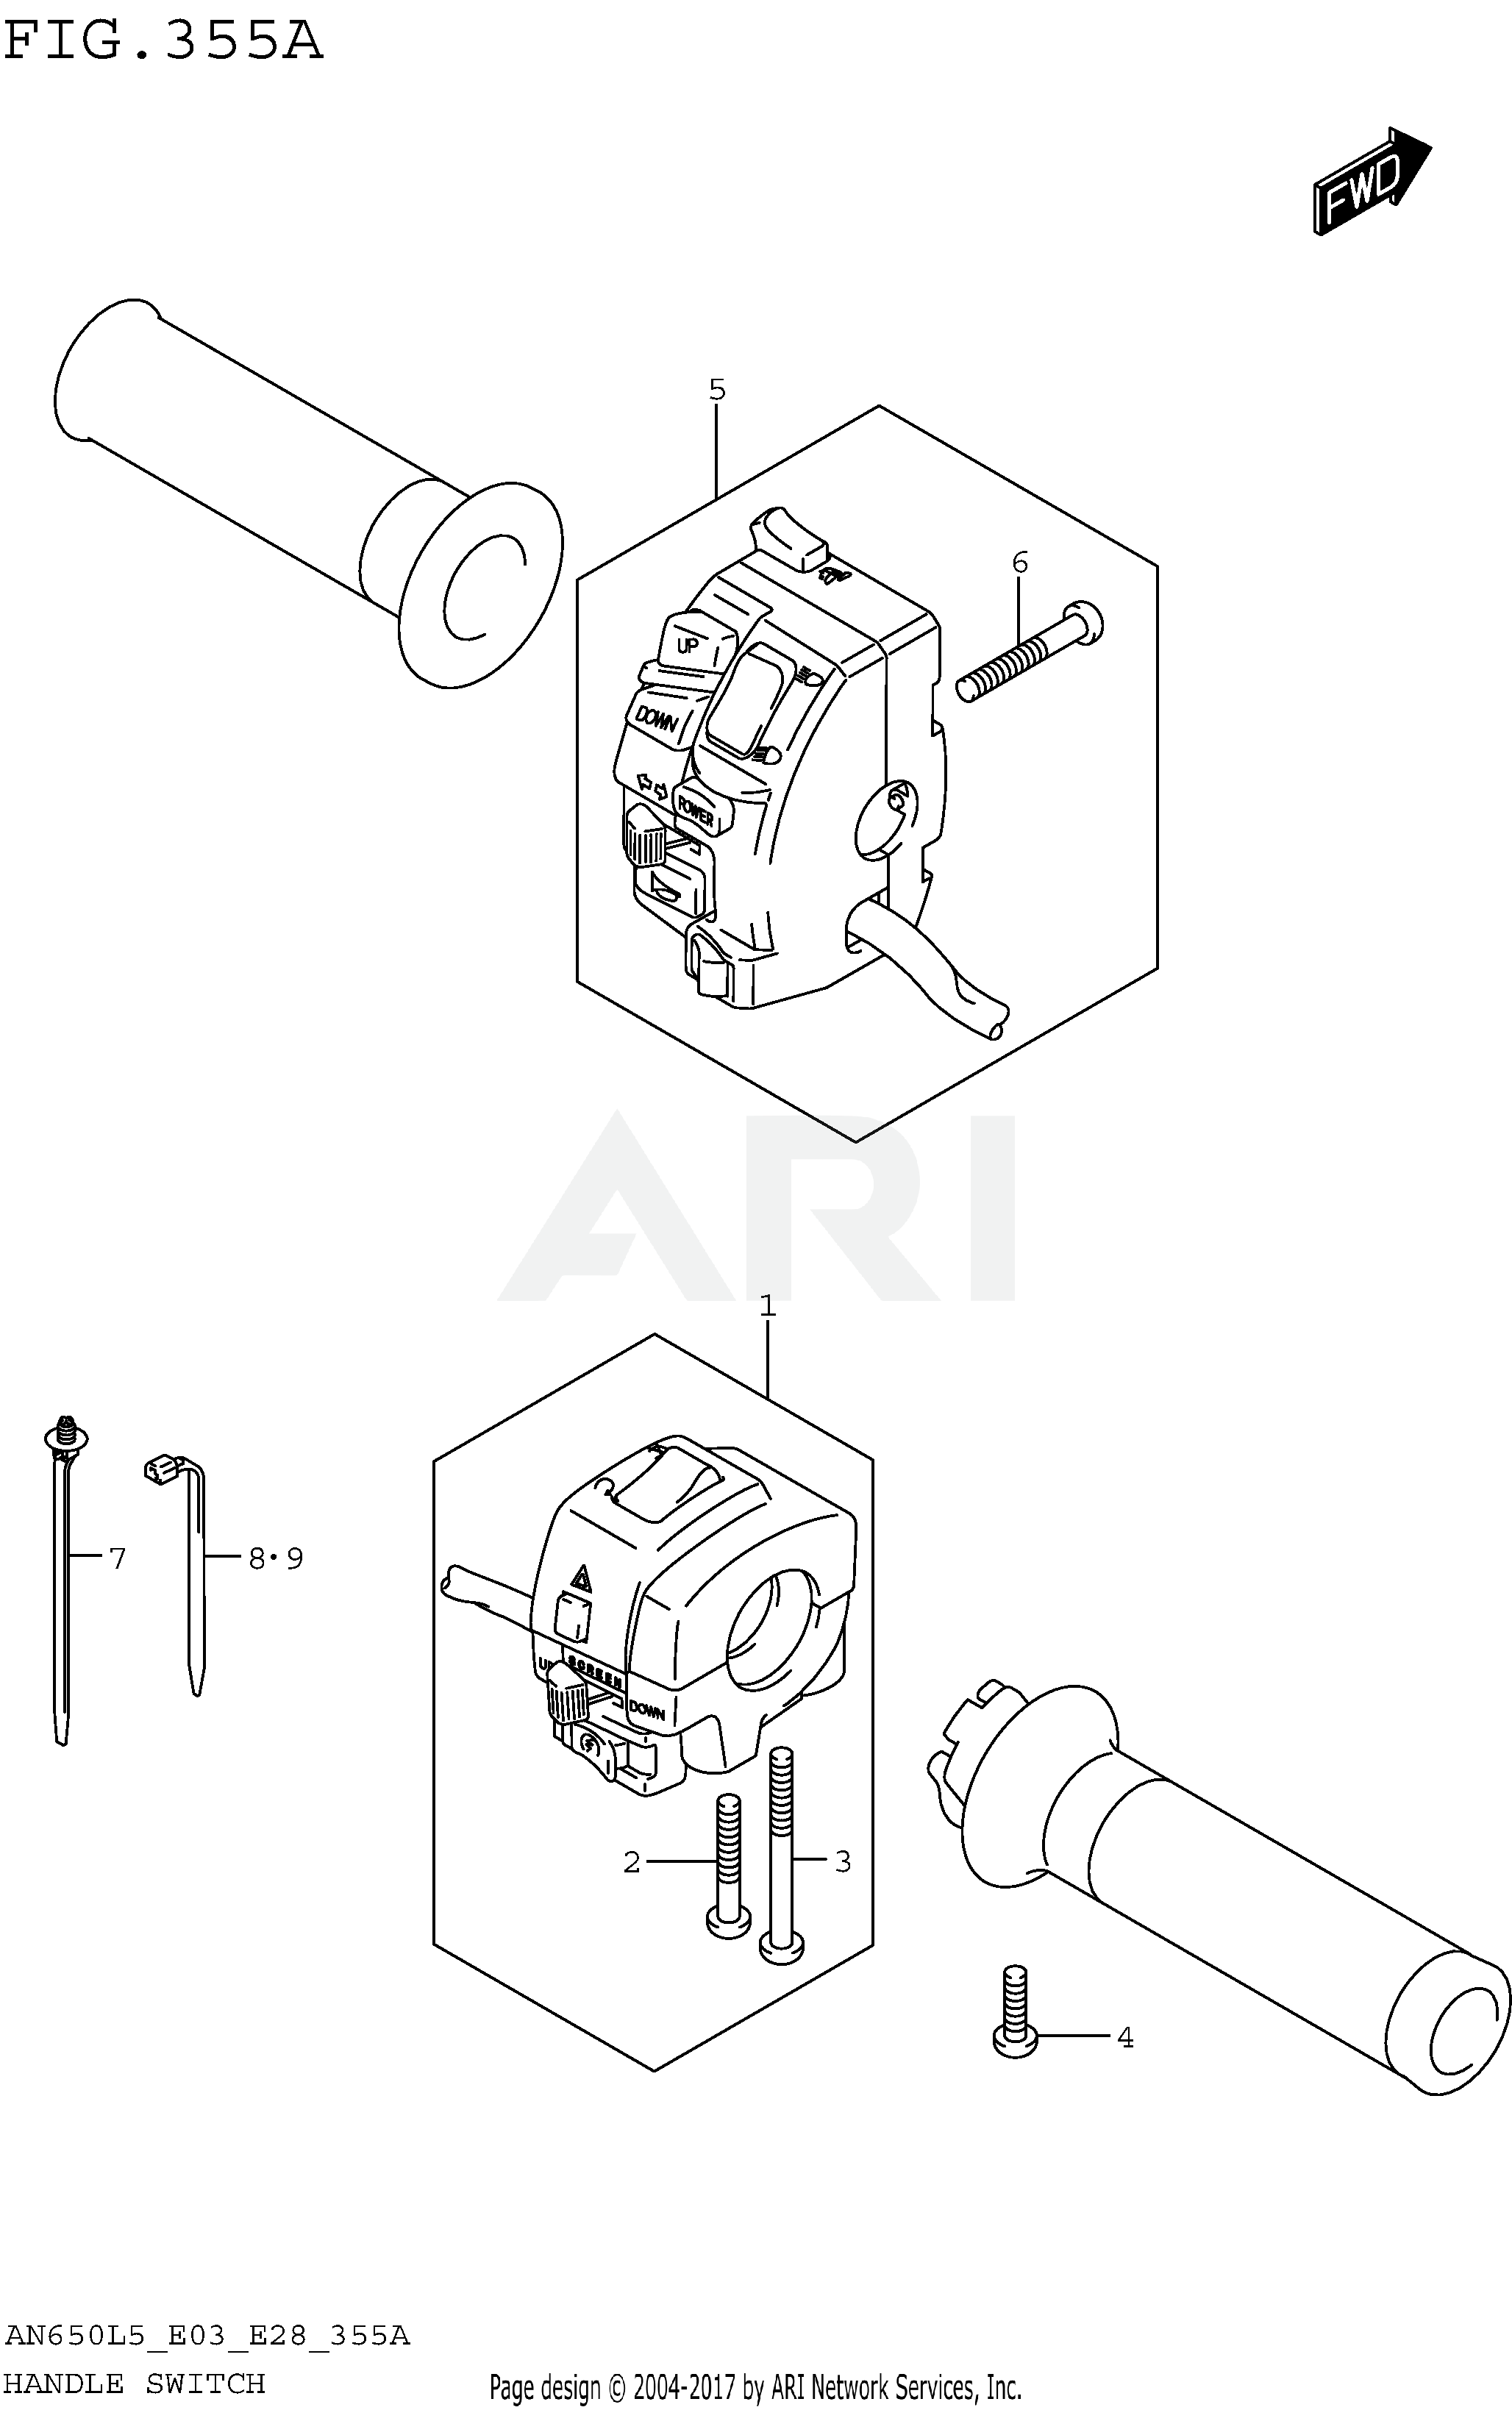 HANDLE SWITCH (AN650L5 E03)